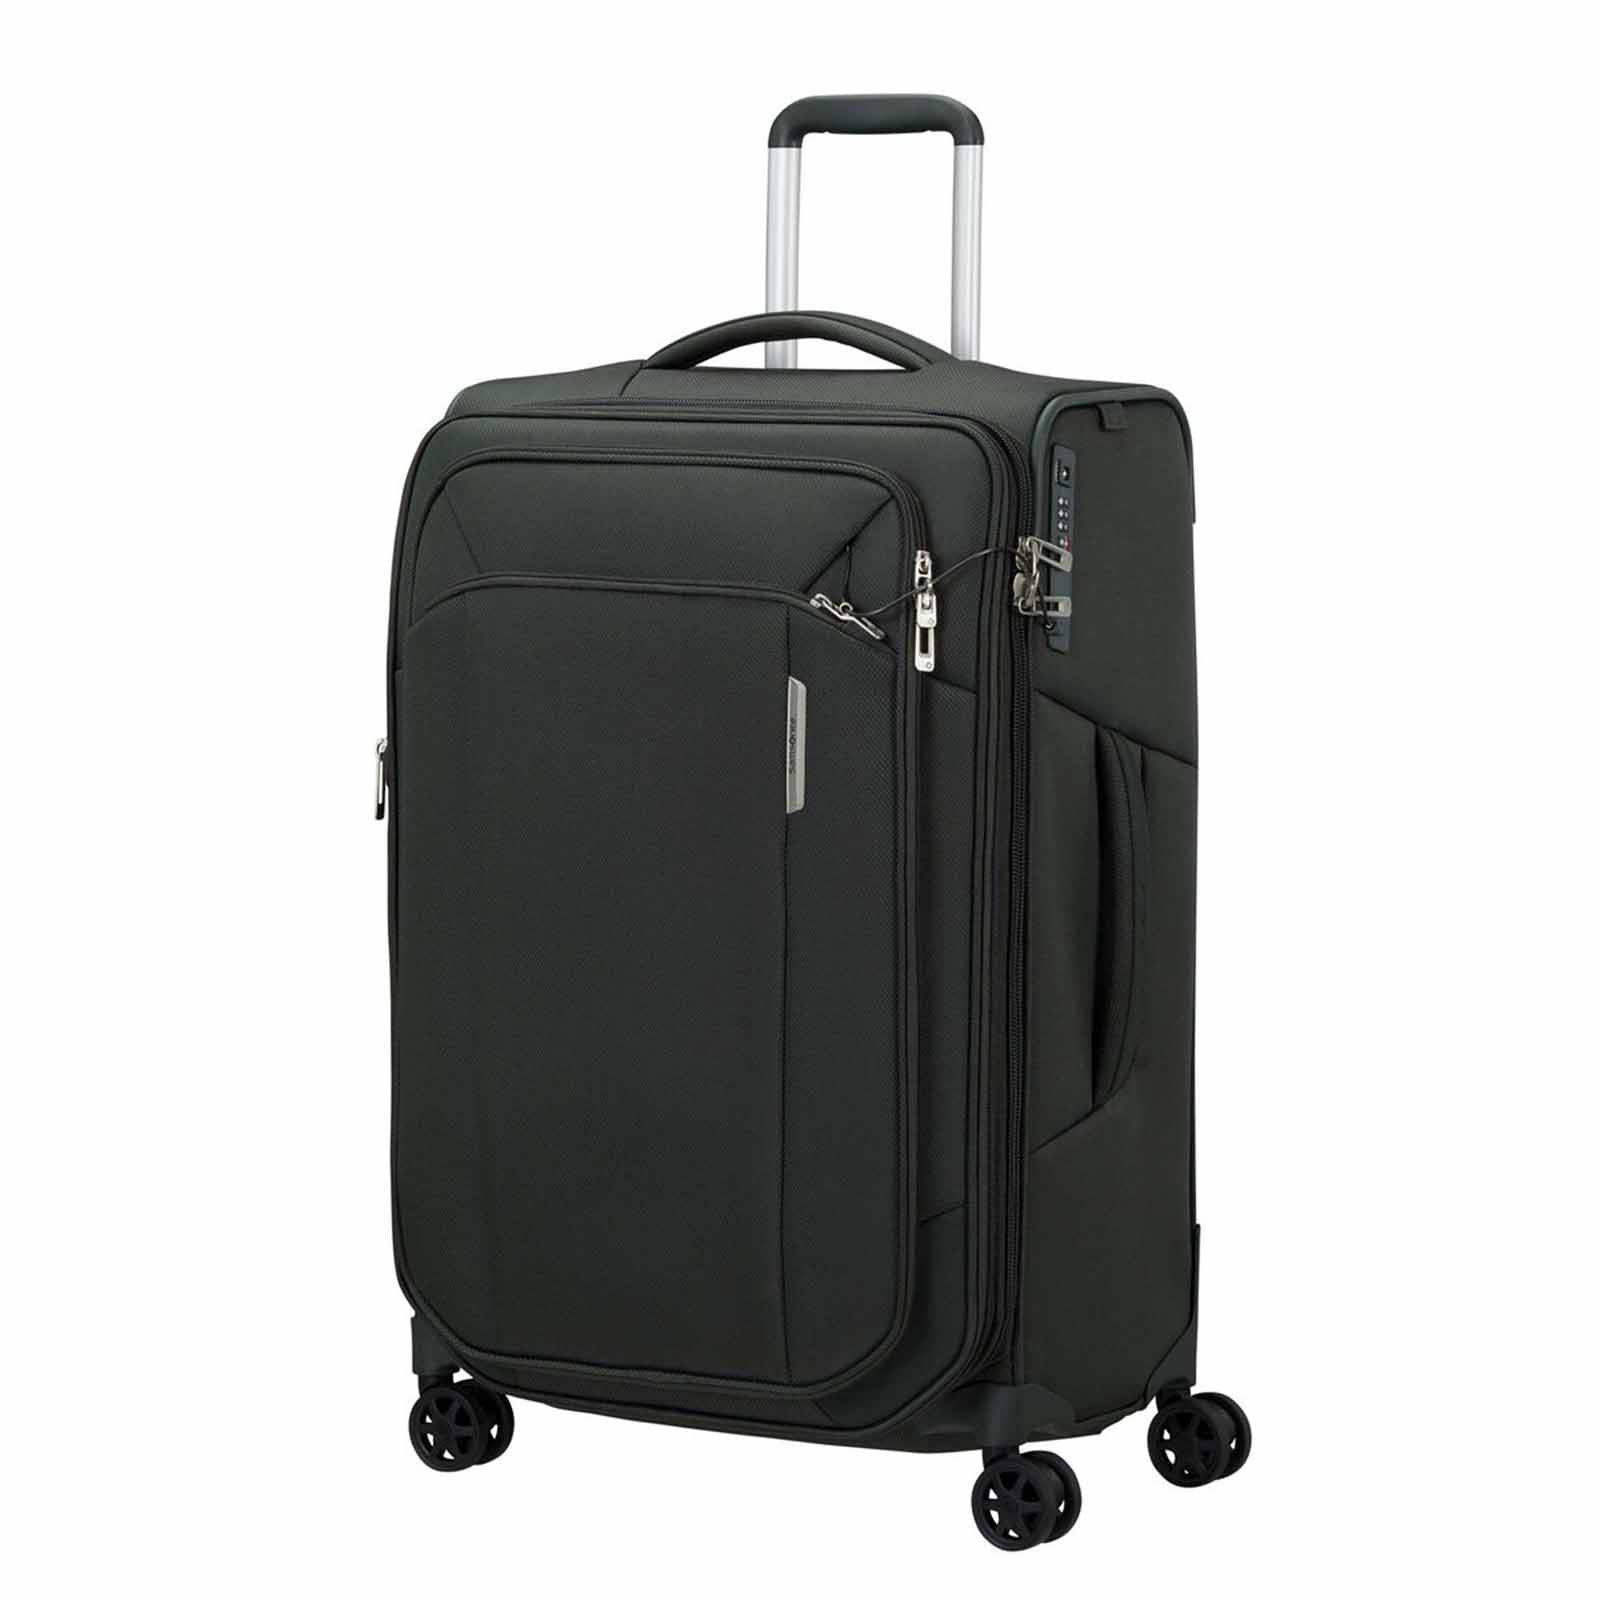 Samsonite-Respark-67cm-Suitcase-Forest-Green-Front-Angle